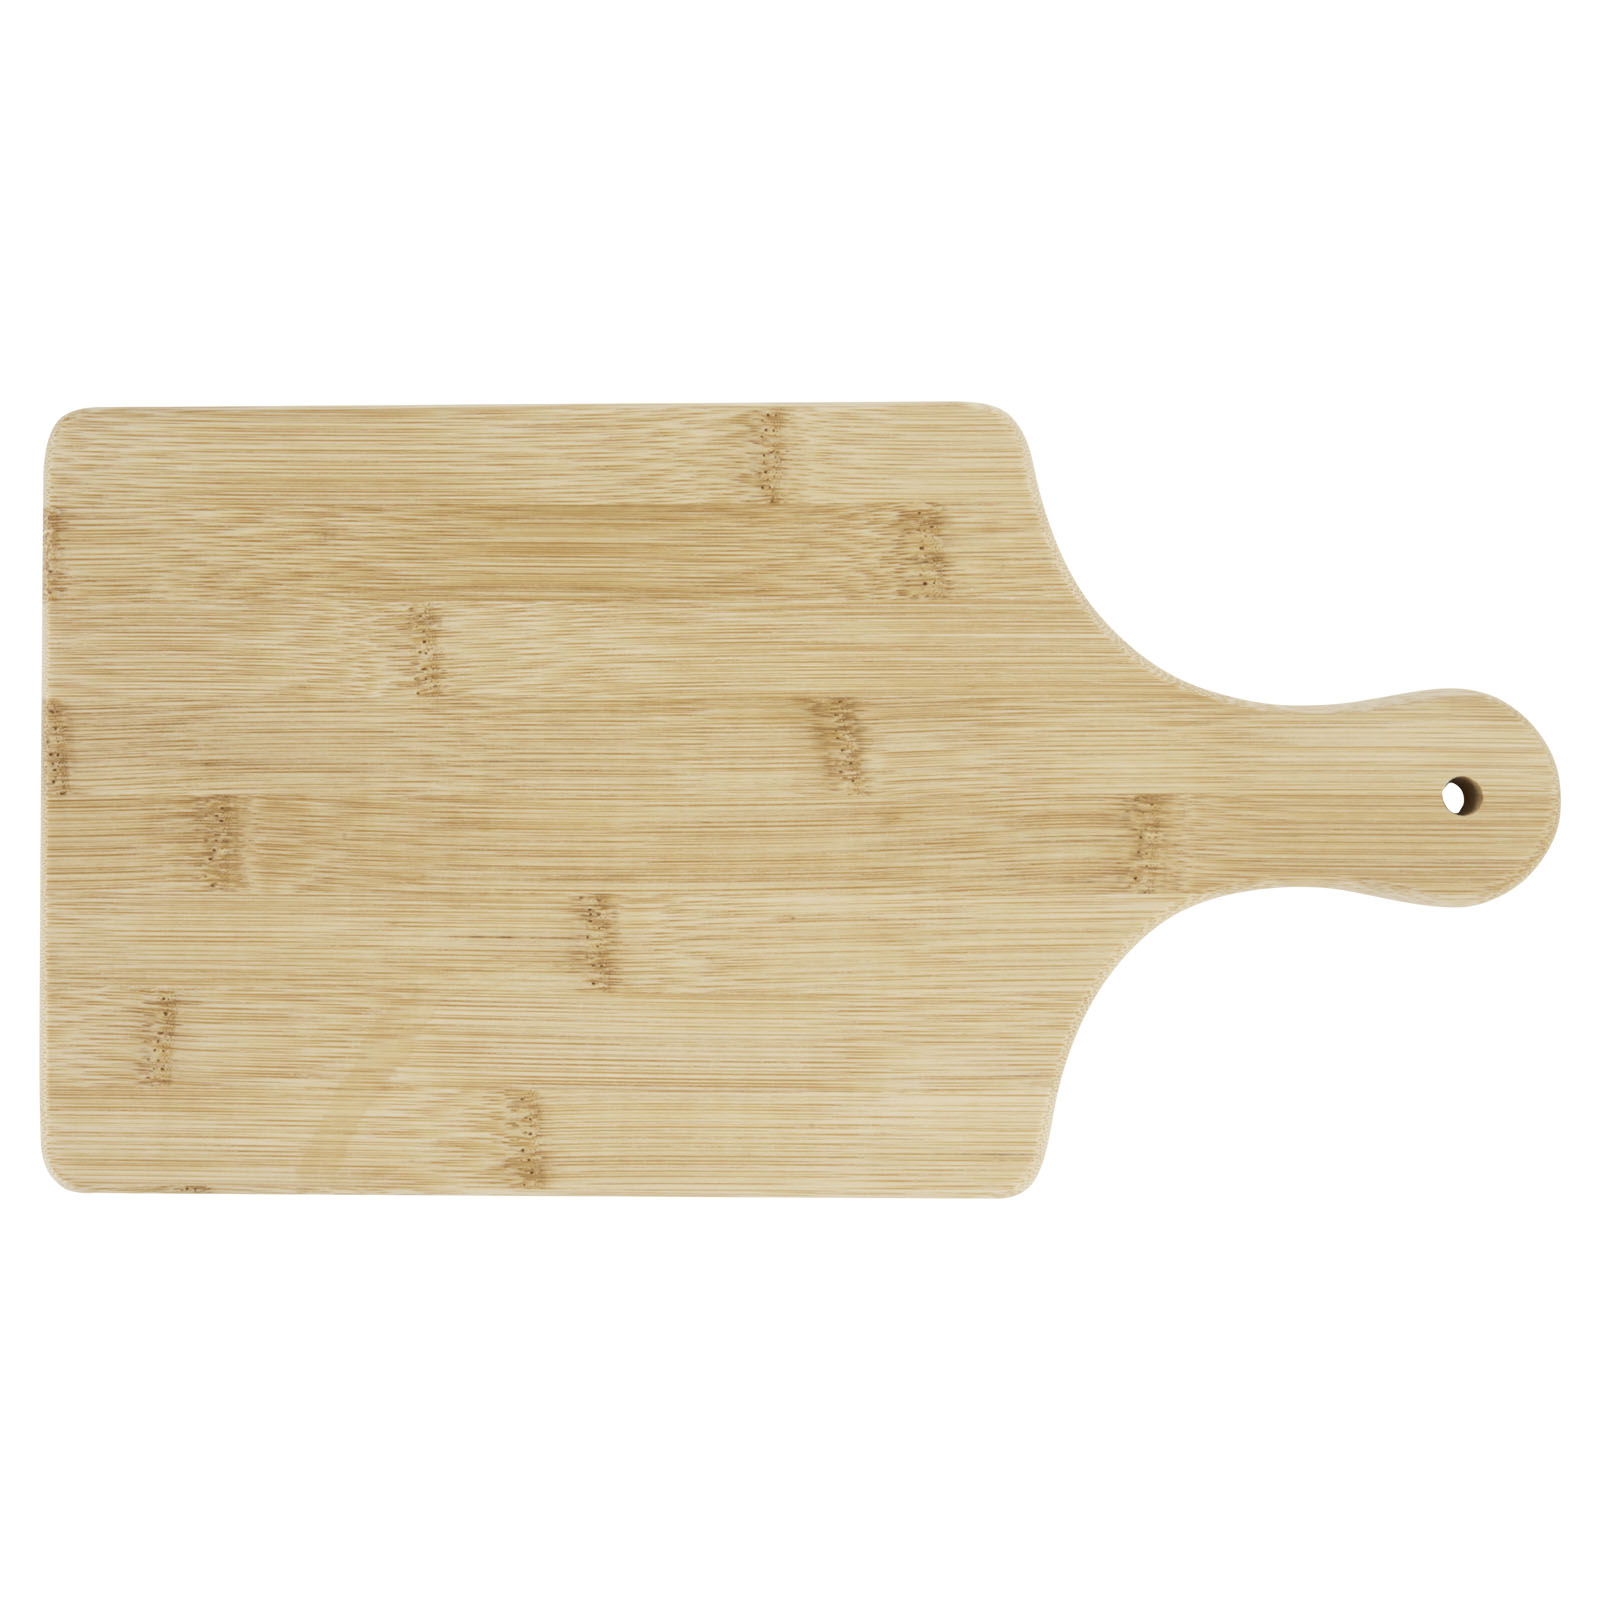 Advertising Cutting Boards - Quimet bamboo cutting board - 2